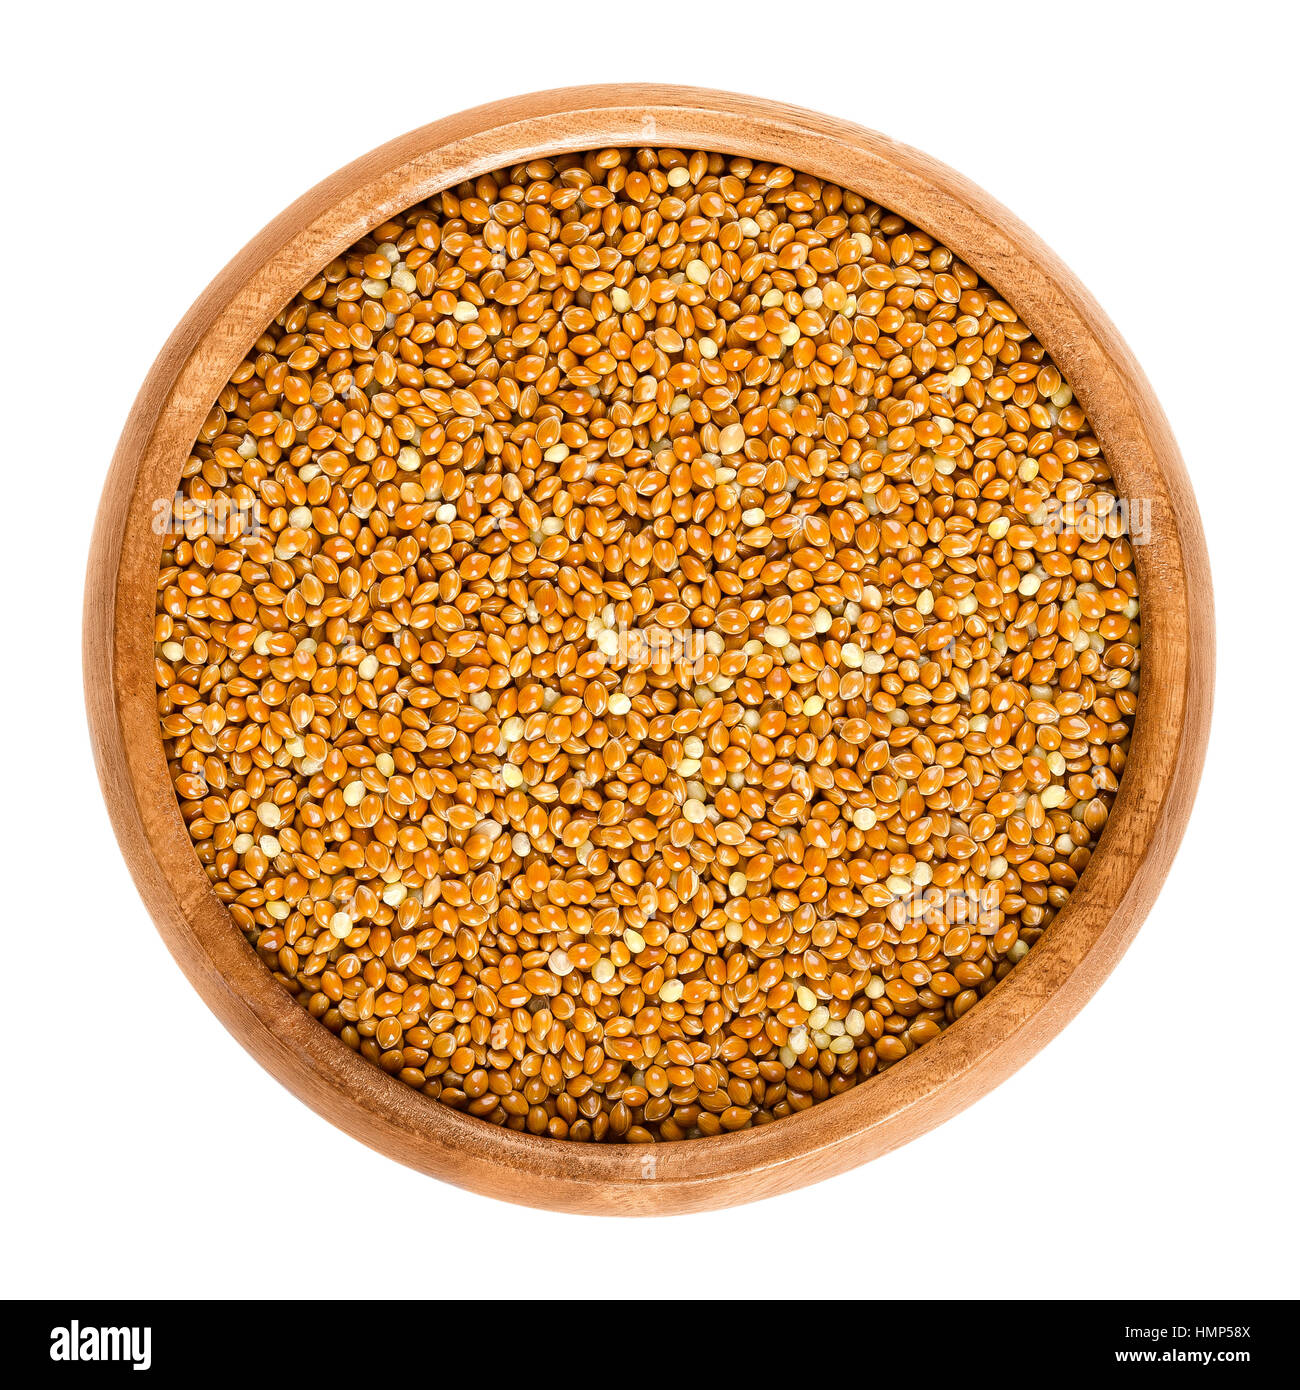 Wholemeal brown millet in a wooden bowl. Reddish colored archetype millet grains. Mineral rich cereal. Edible, raw, wild and organic. Macro photo. Stock Photo